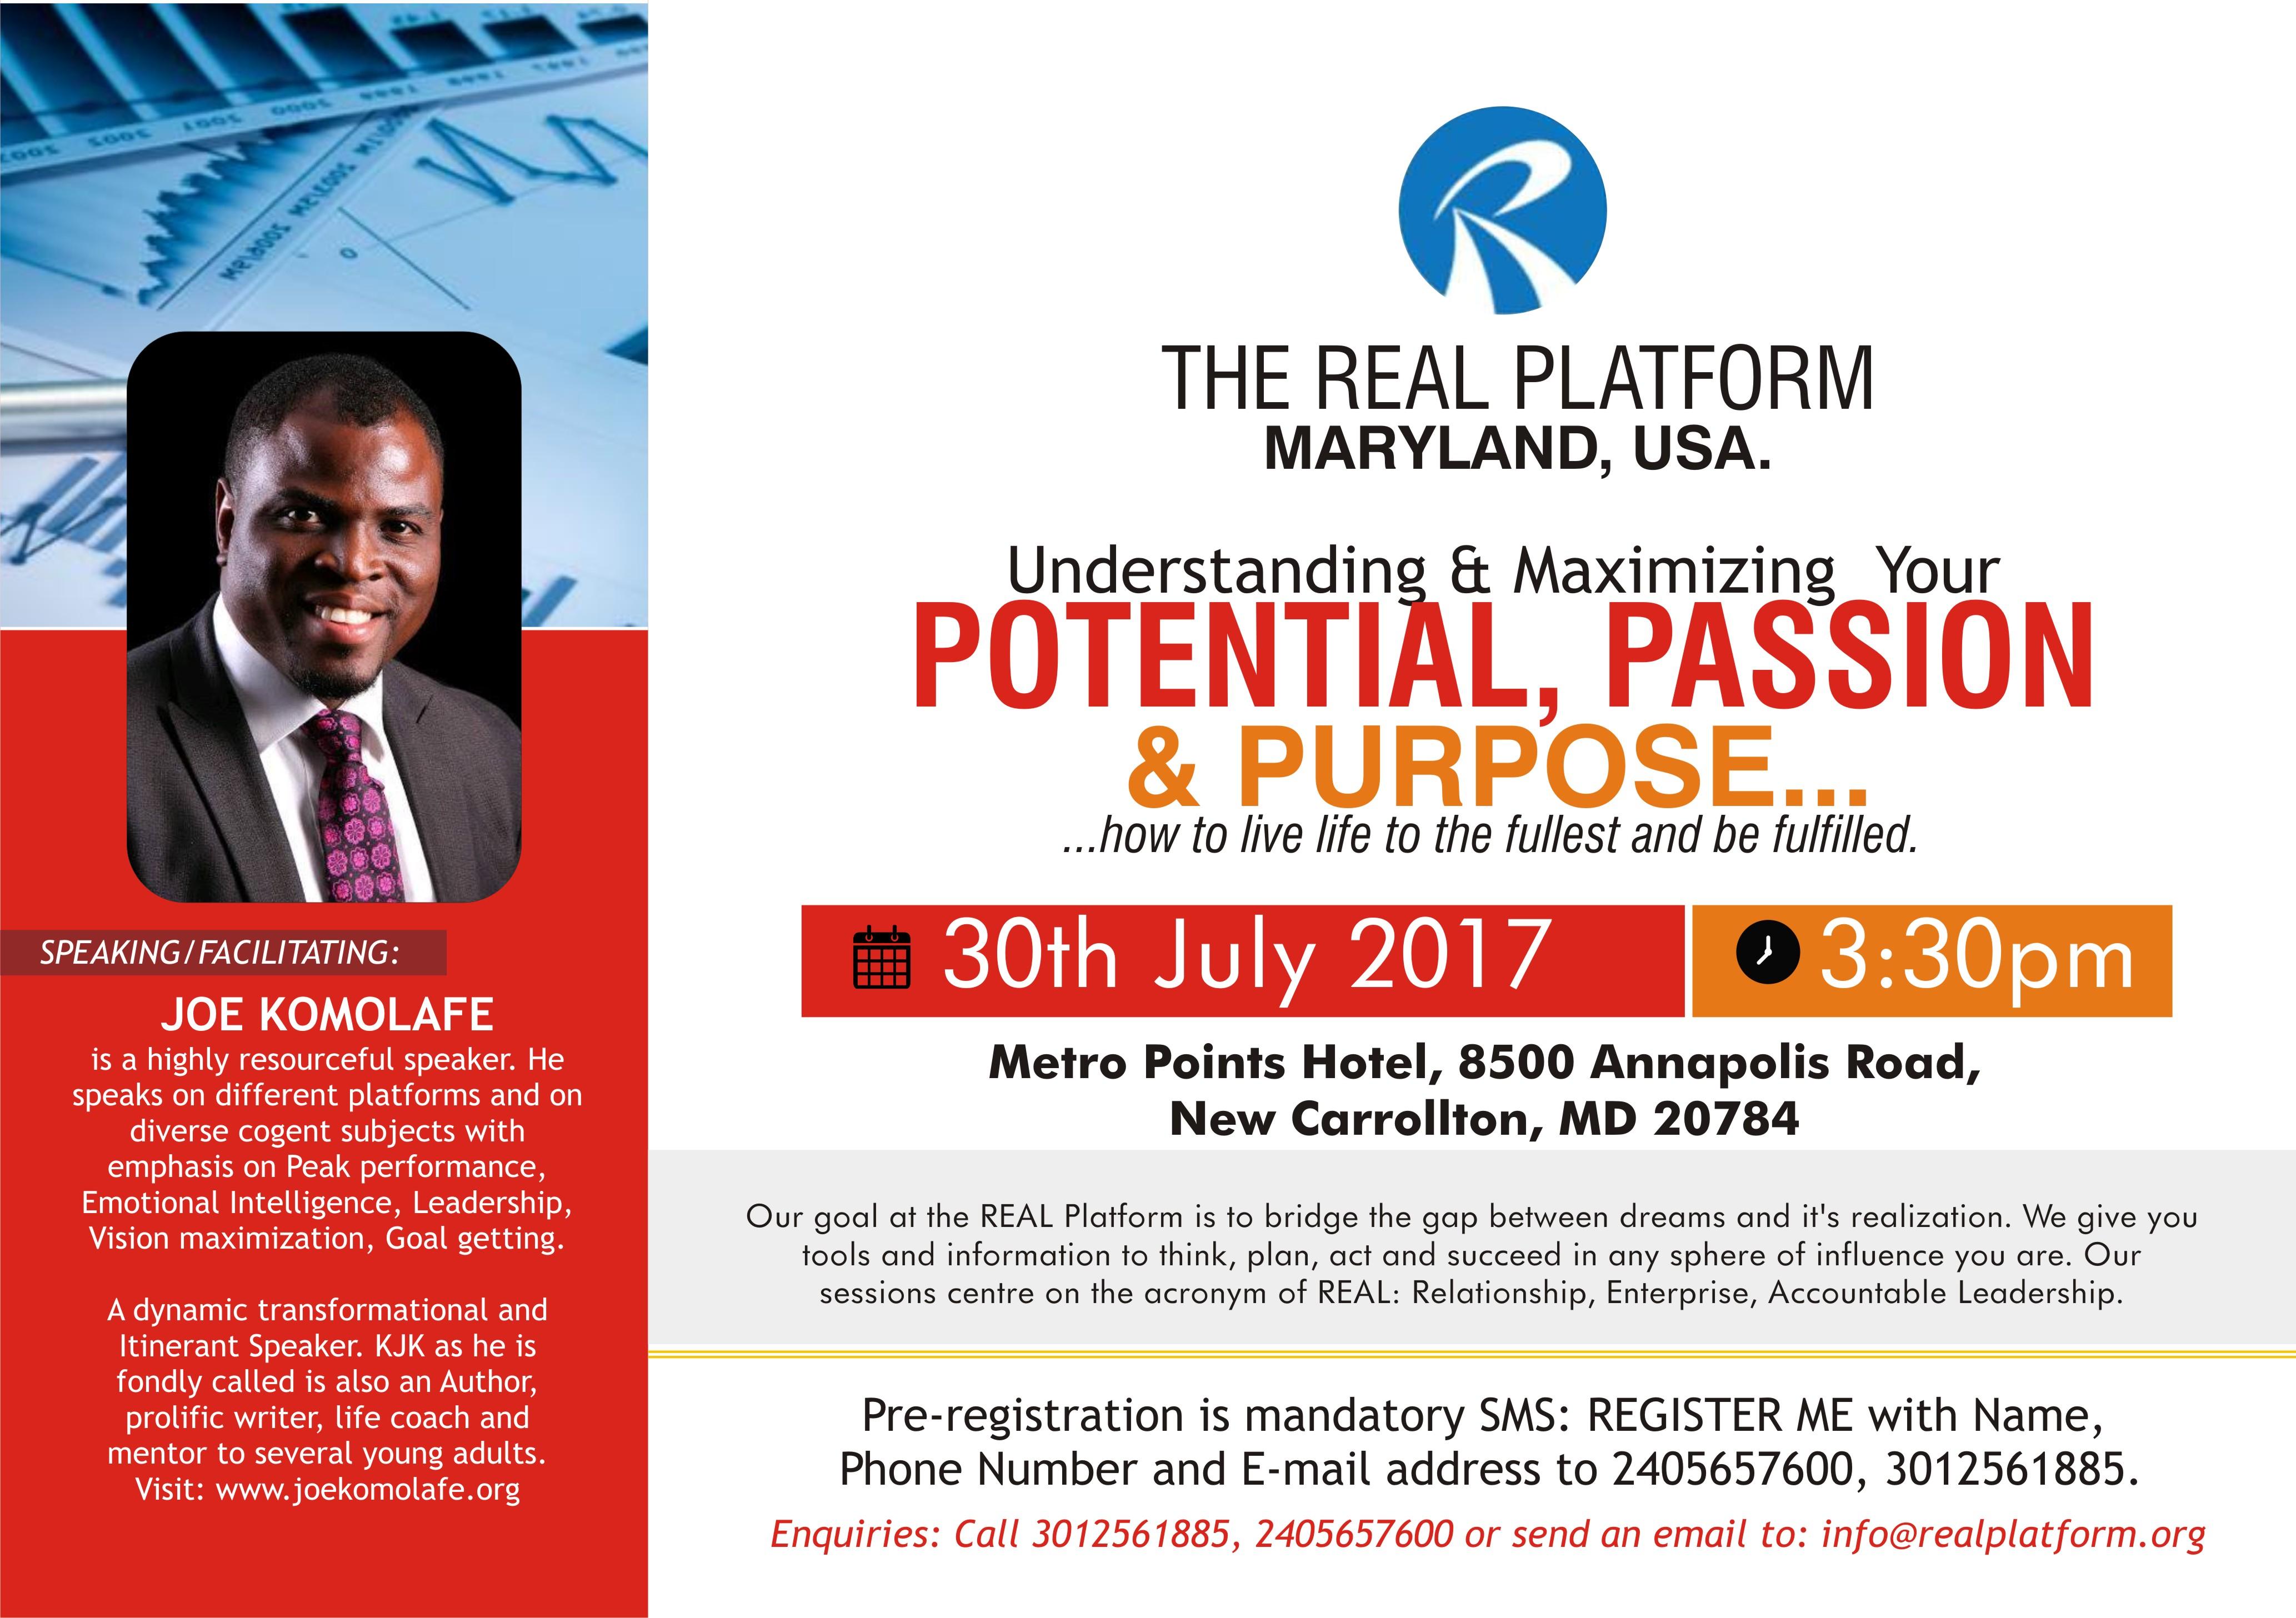 Understanding & Maximizing your Potential, Passion & Purpose...